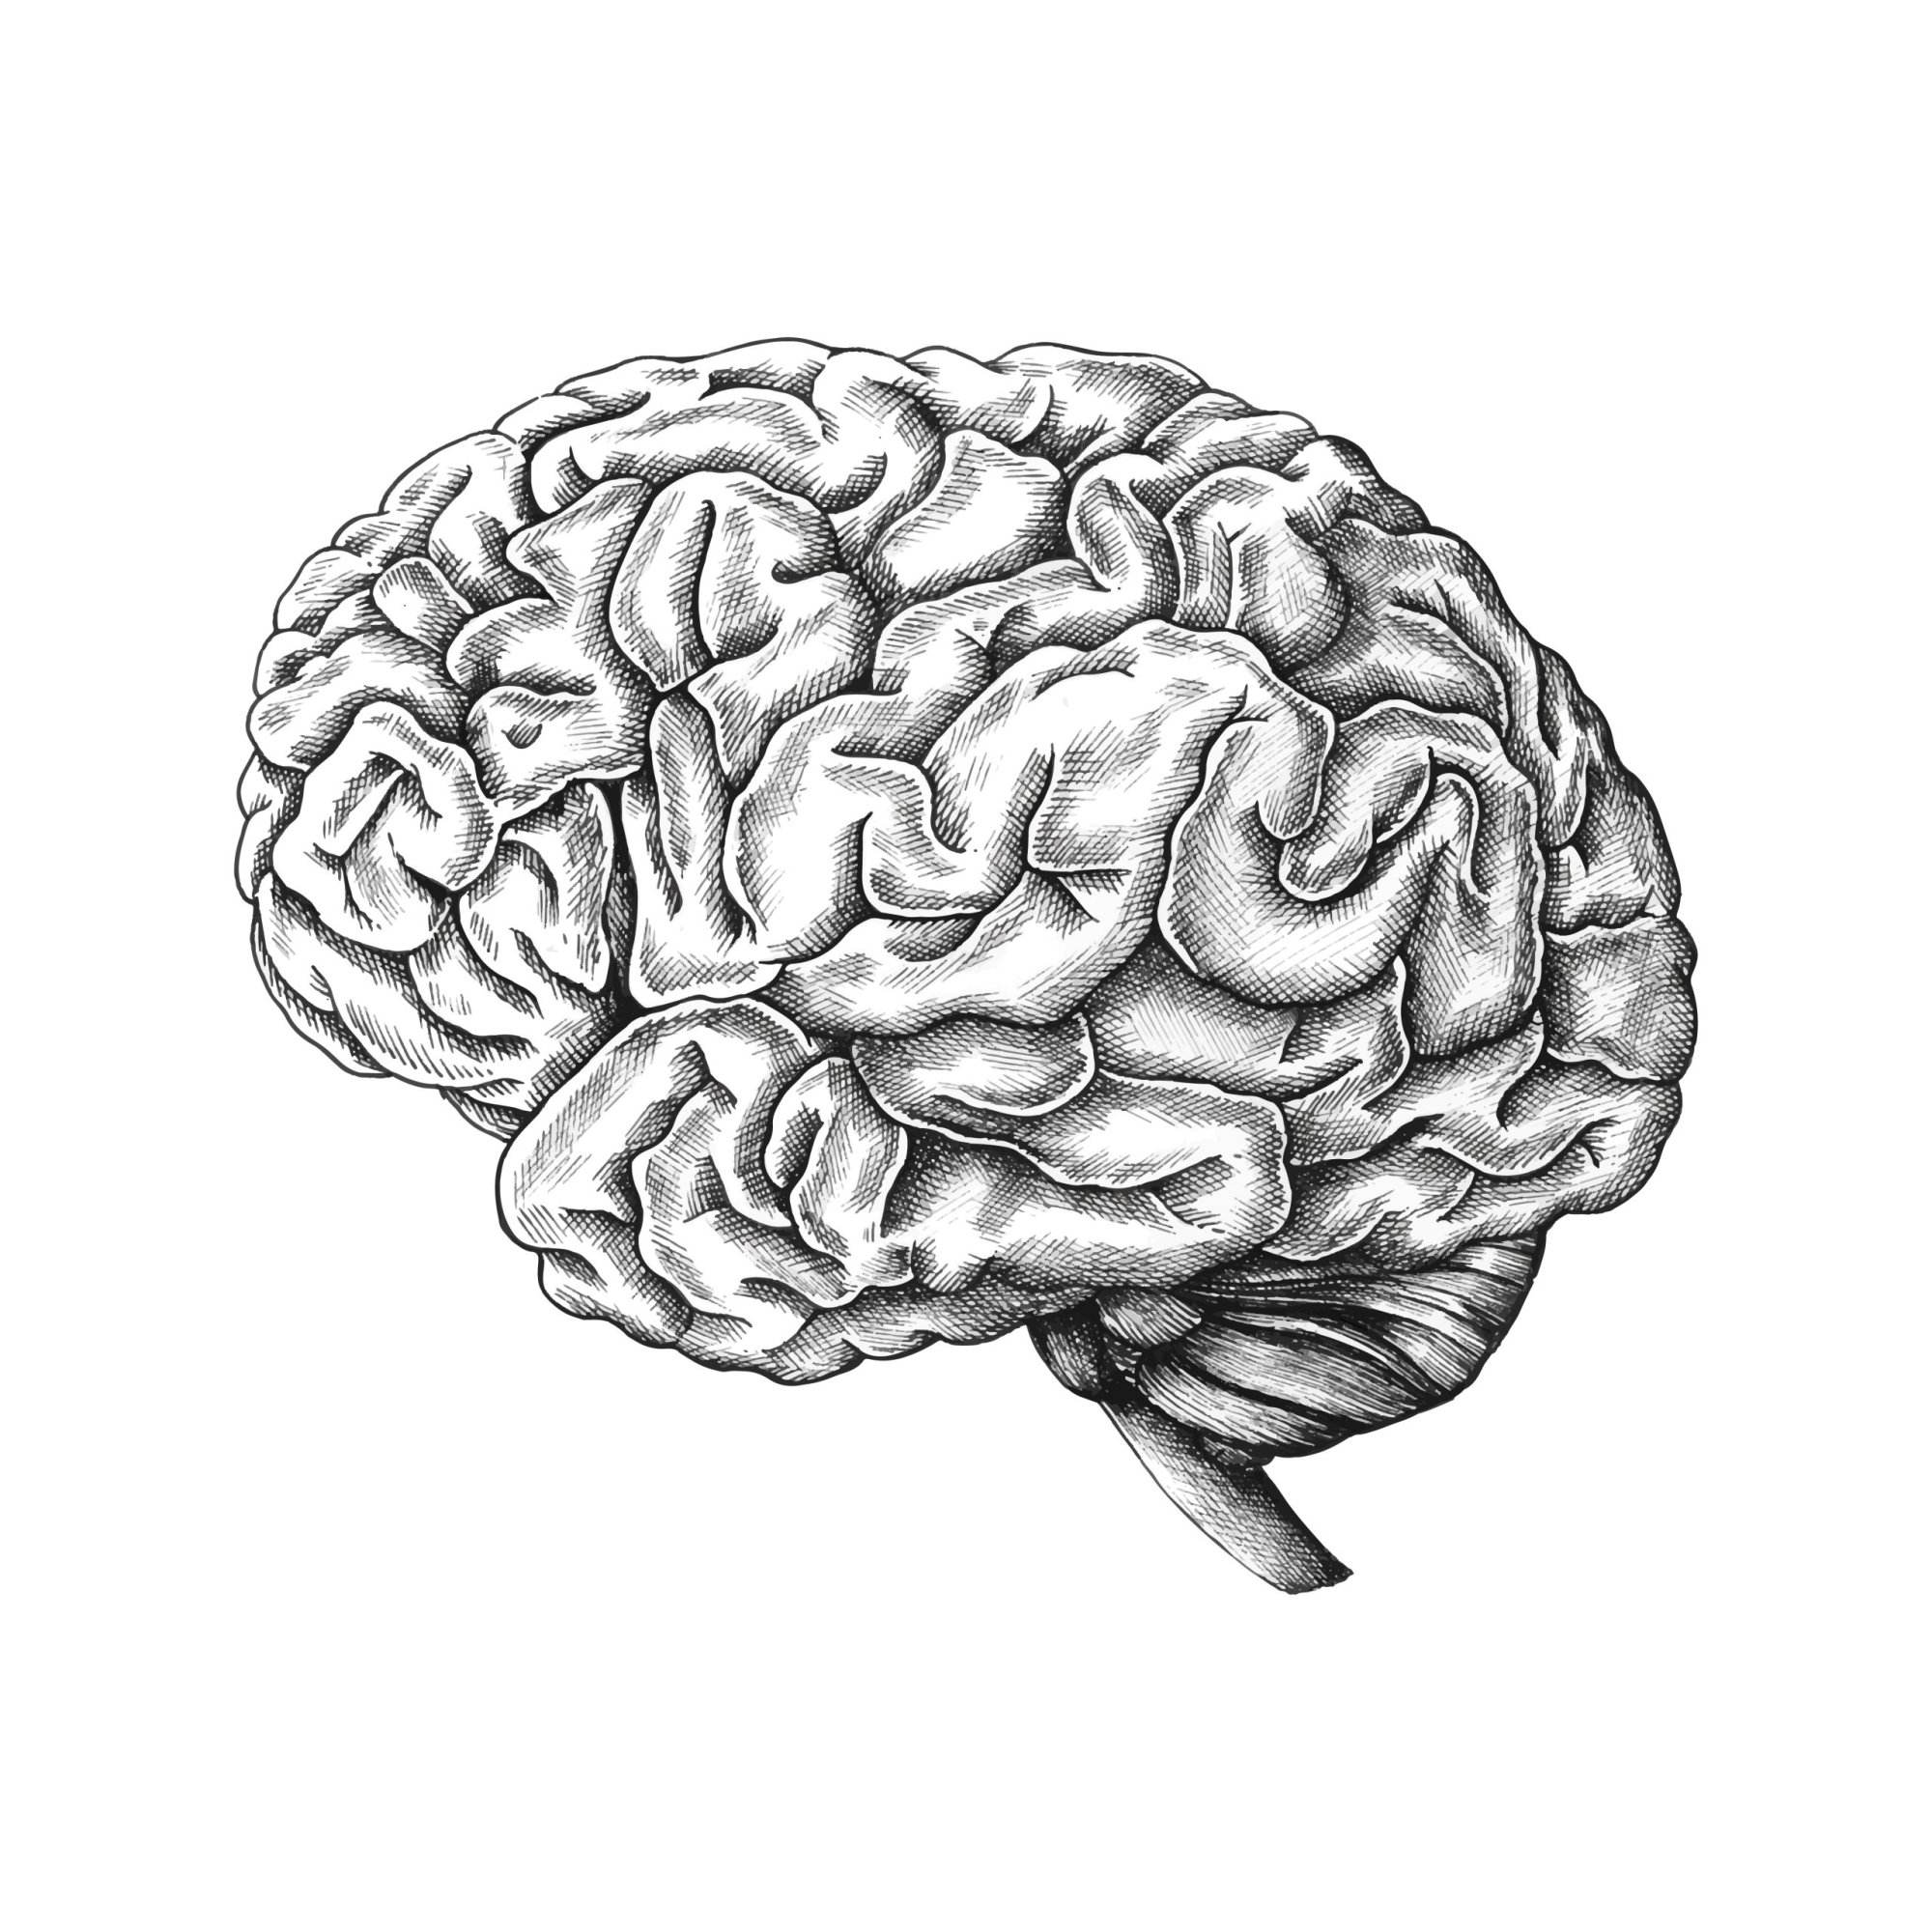 Hand drawn image of a brain